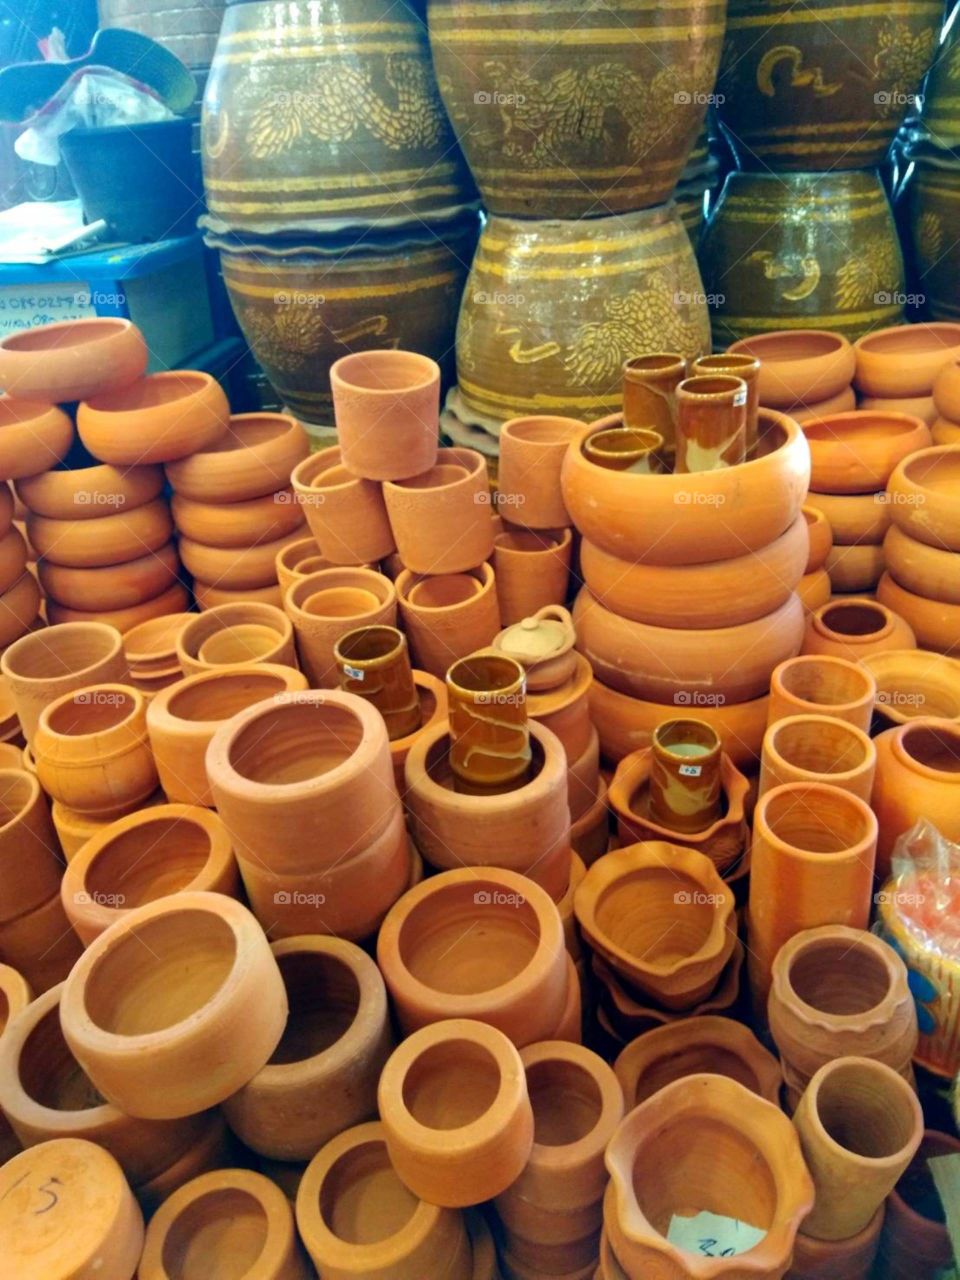 Pottery for sale.